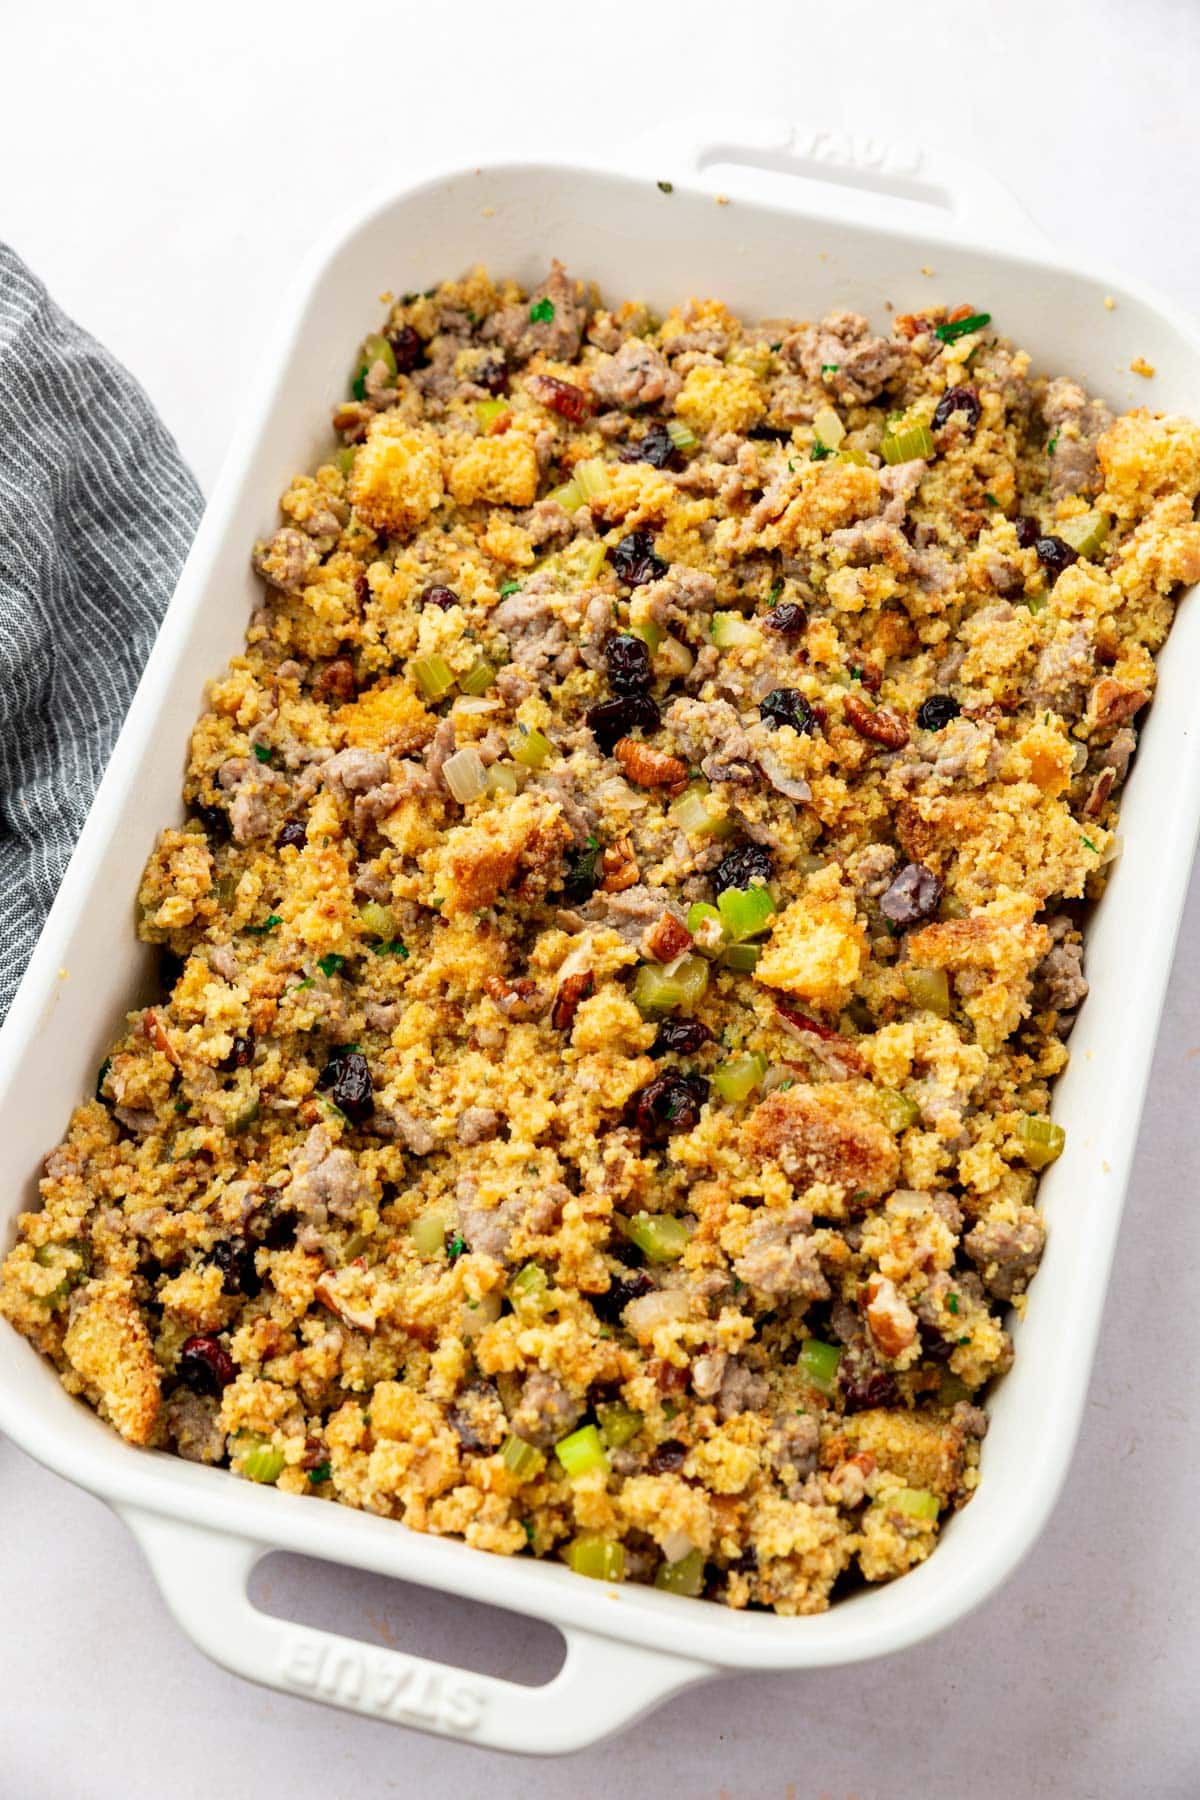 A rectangular baking dish of gluten-free cornbread stuffing before baking in the oven.